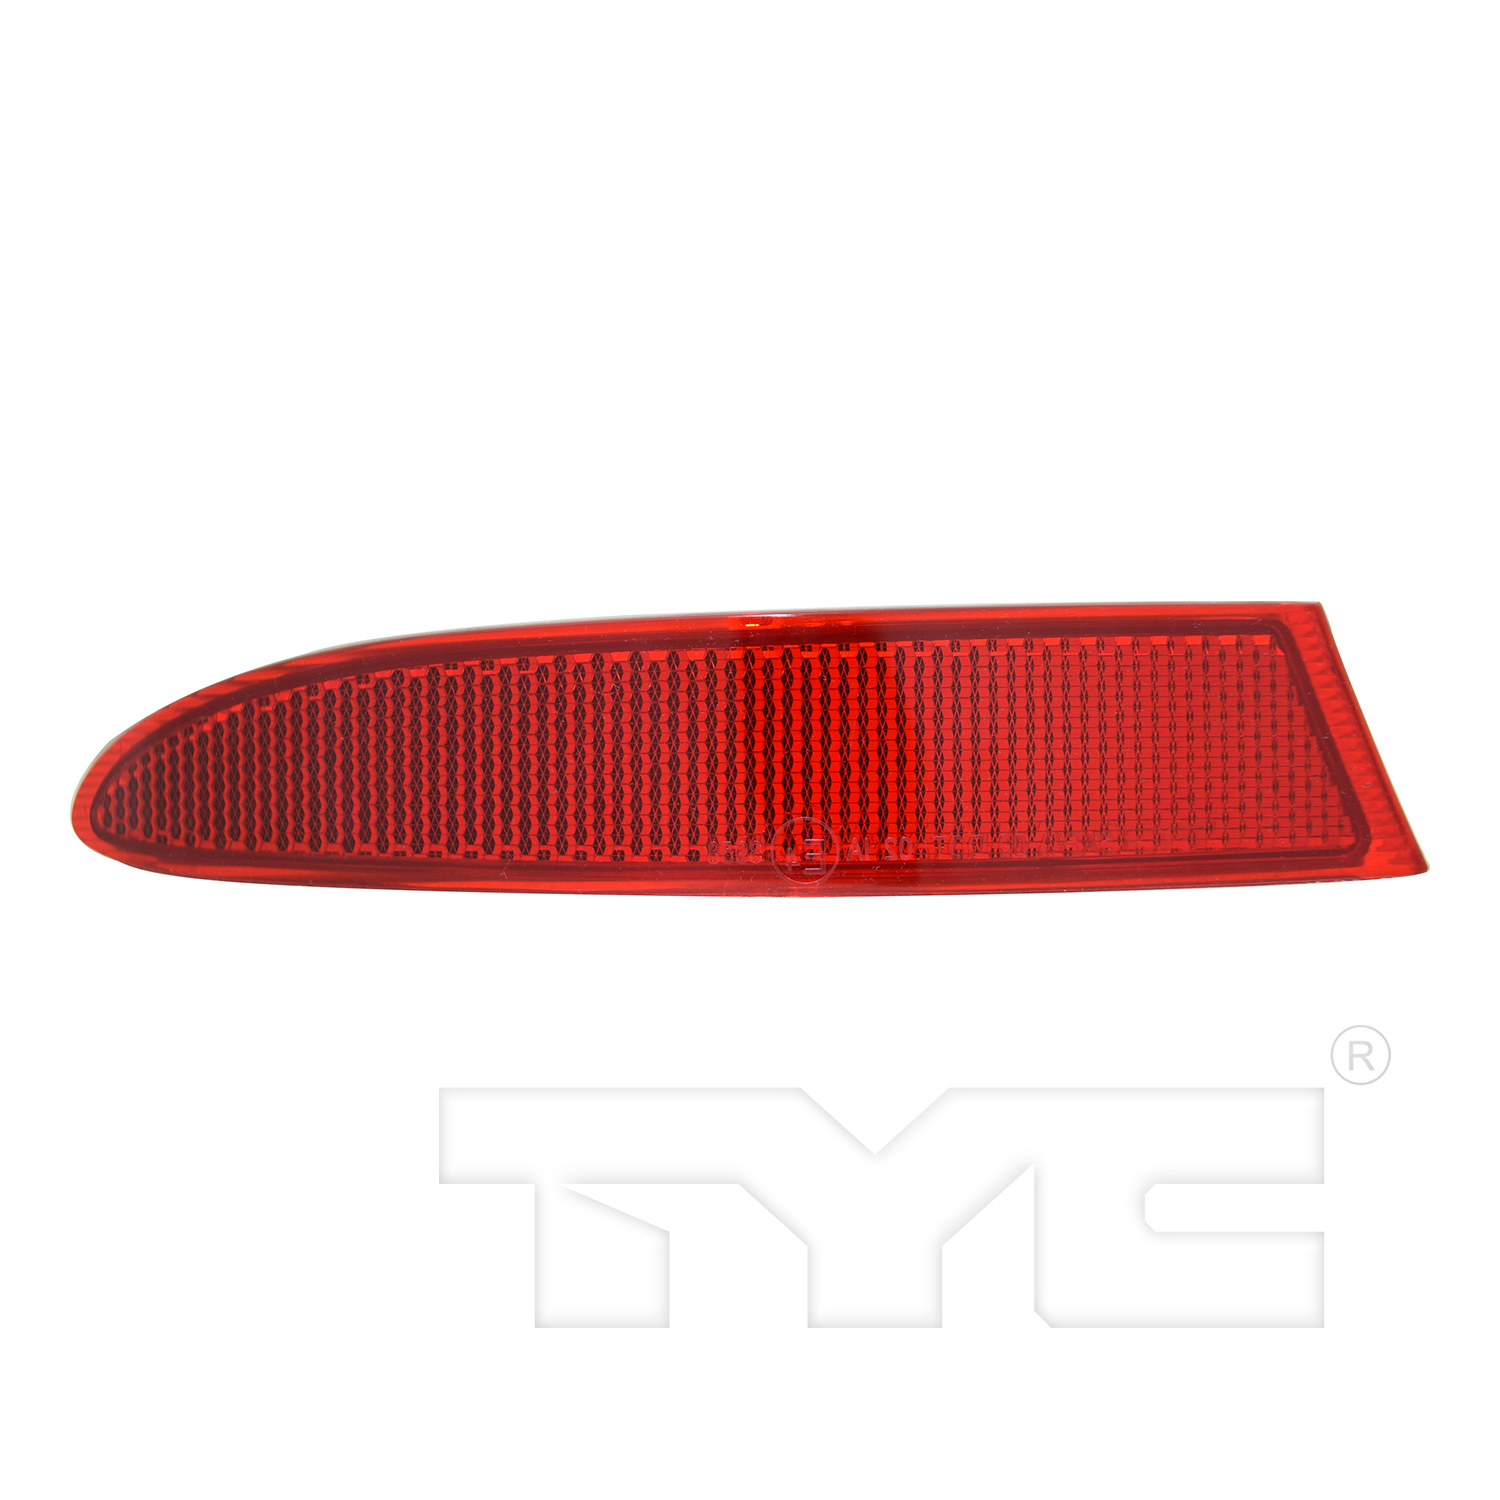 Aftermarket LAMPS for BMW - X3, X3,11-14,LT Rear bumper reflector